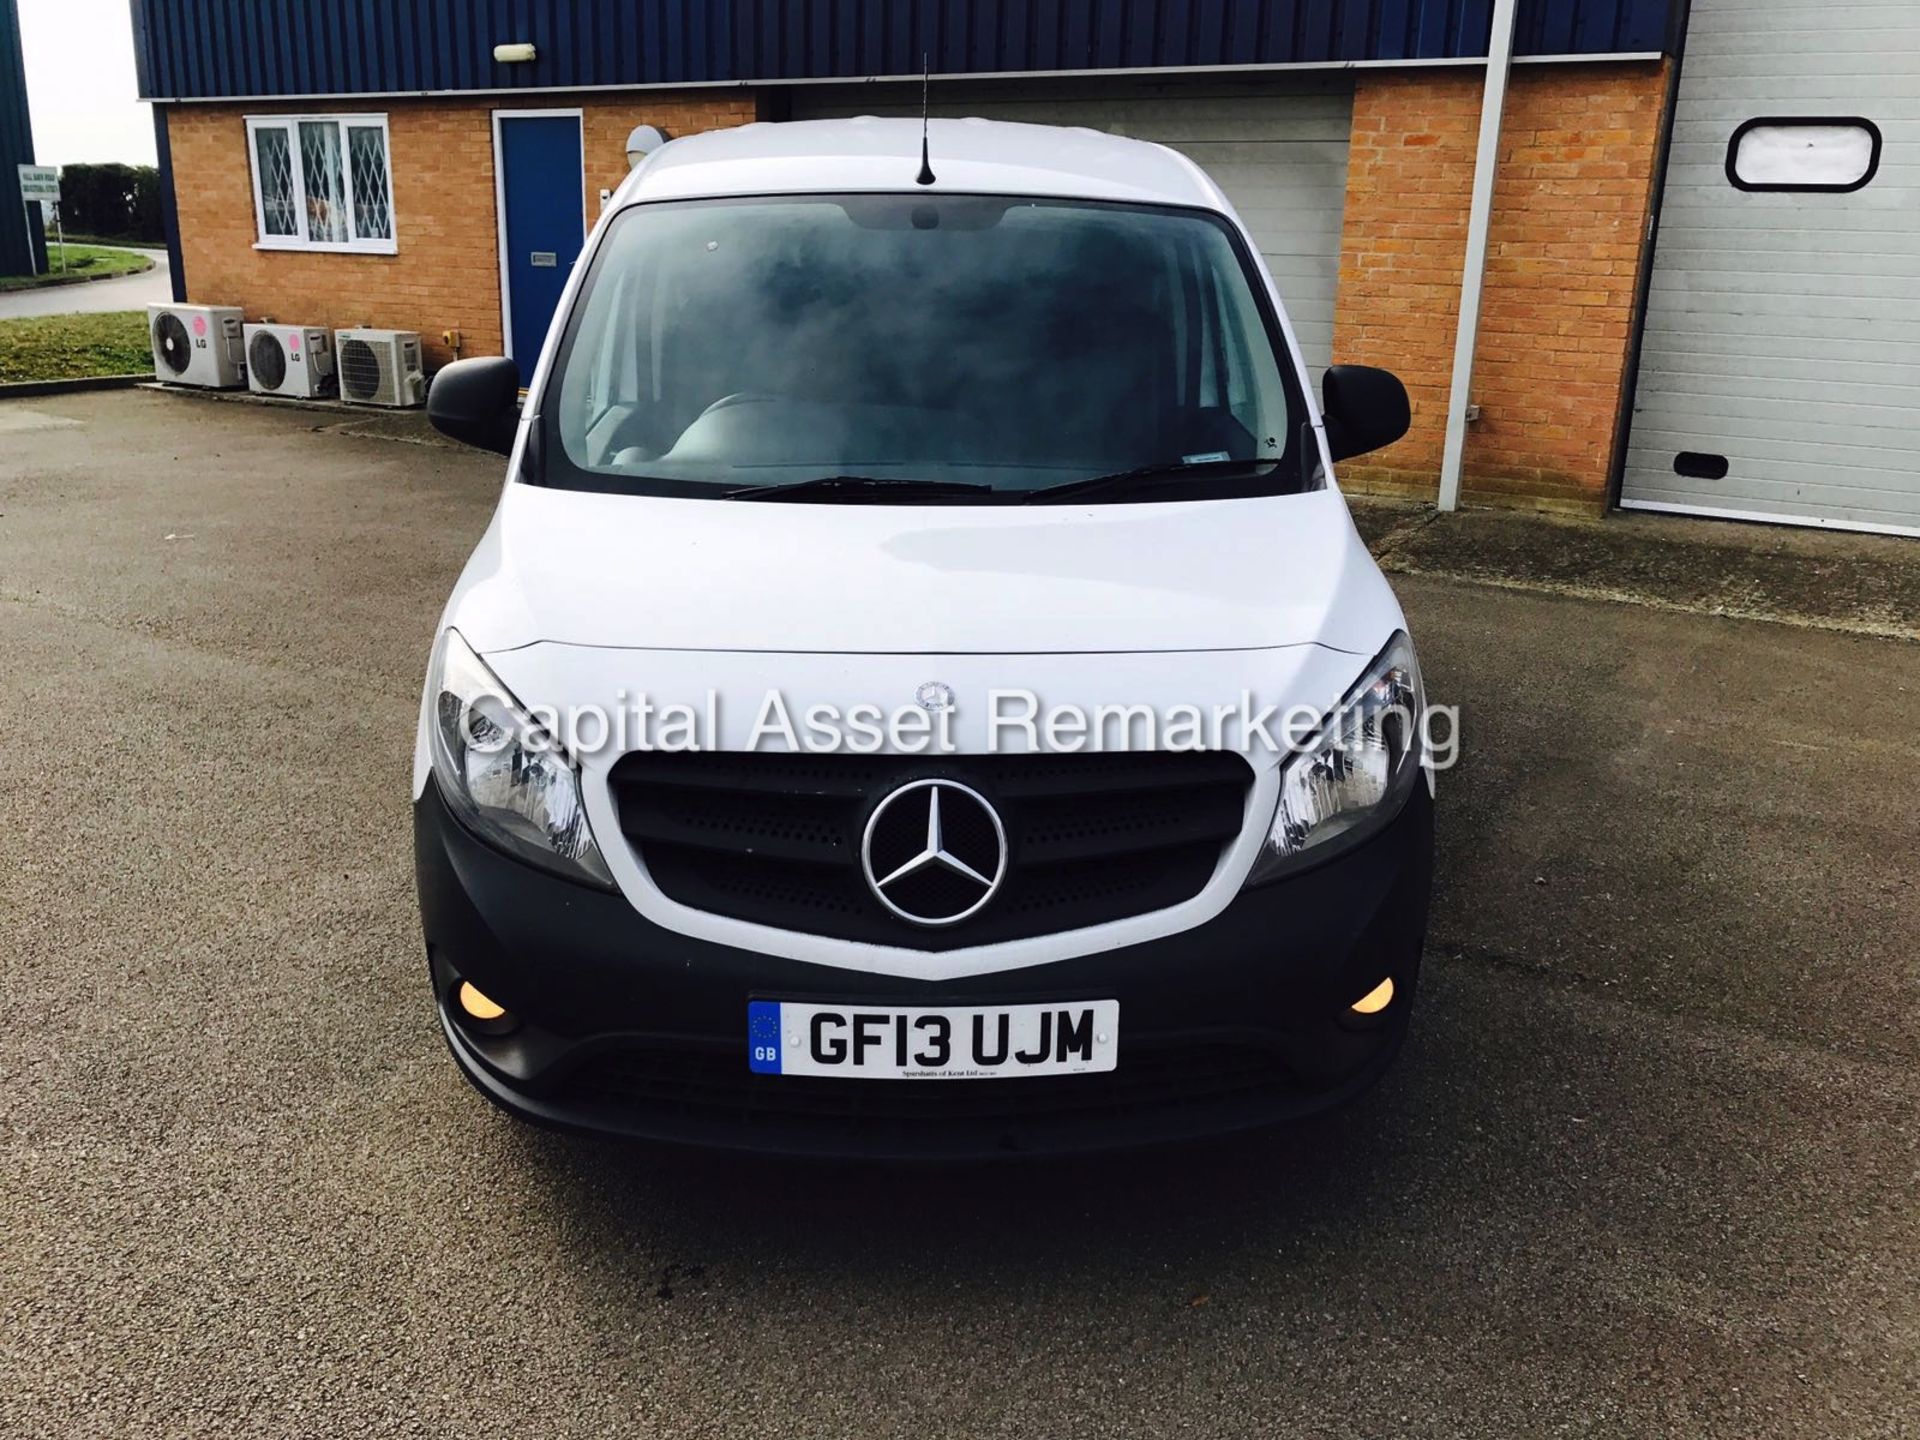 (ON SALE) MERCEDES CITAN 109CDI LONG WHEEL BASE - 13 REG - 1 OWNER FROM NEW - GREAT SPEC - LOOK!!! - Image 2 of 9